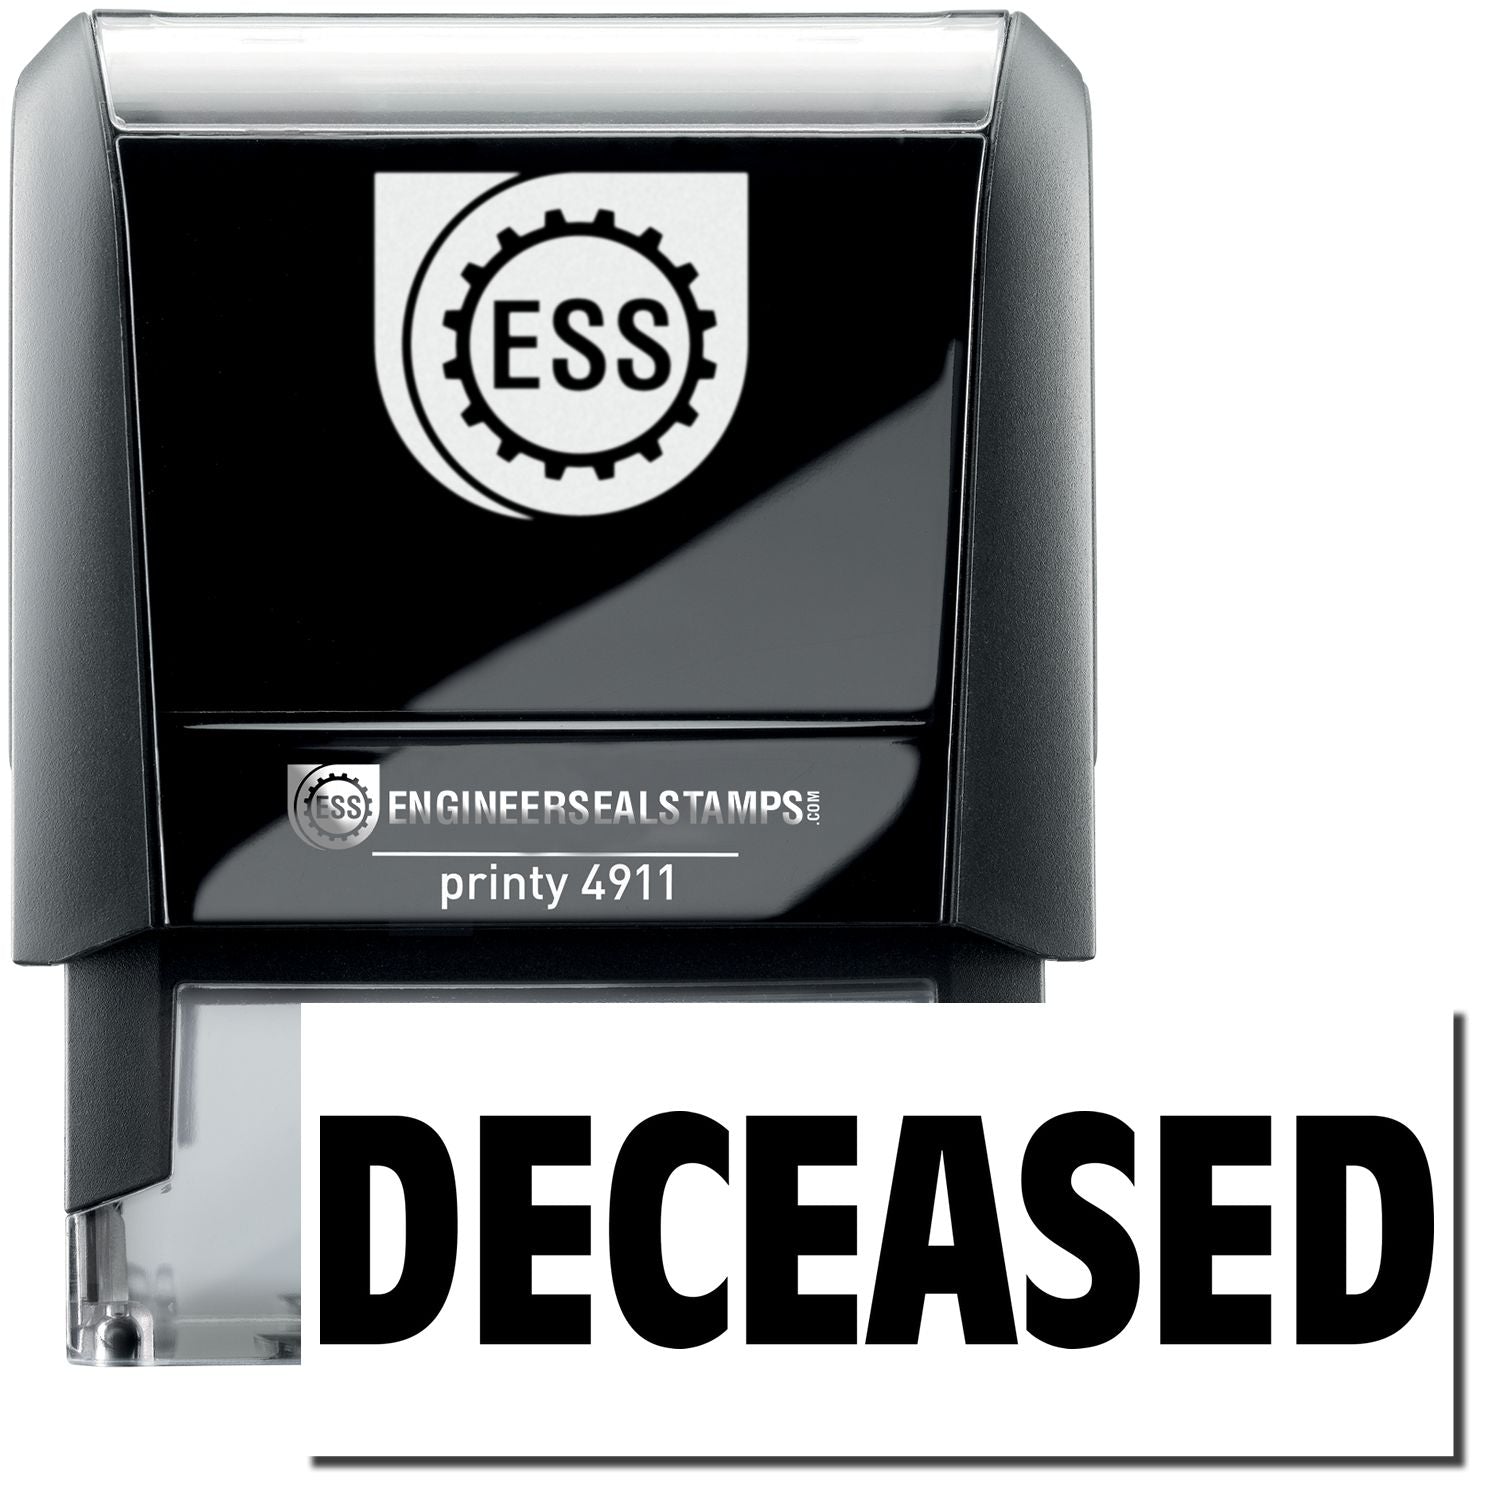 A self-inking stamp with a stamped image showing how the text "DECEASED" is displayed after stamping.